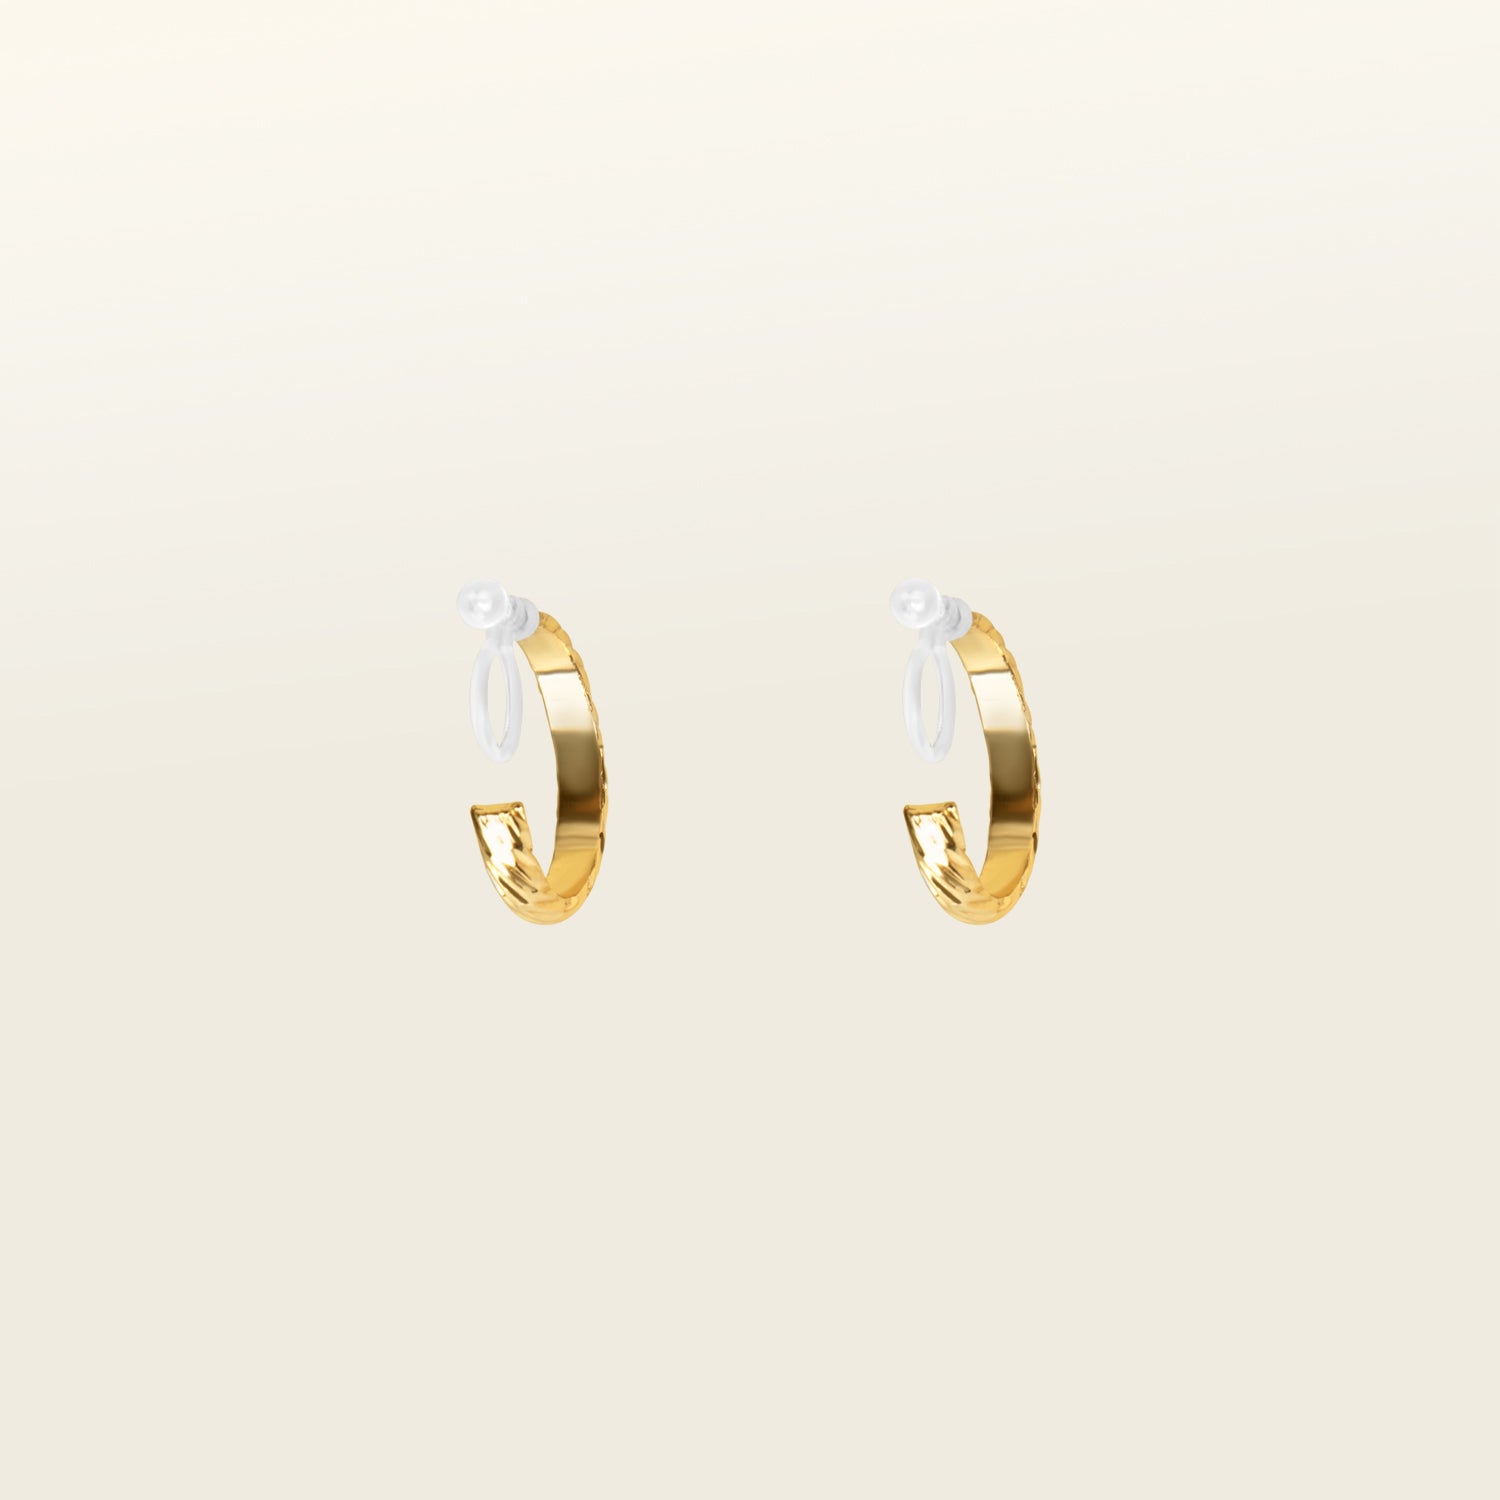 Image of the Gold Talia Hoop Clip-On Earring features a resin clip-on closure that is ideal for all ear types, providing a medium secure hold and an average comfortable wear duration of 8-12 hours. It is not adjustable, and is also available in Silver. The earrings are constructed with a gold tone metal alloy.